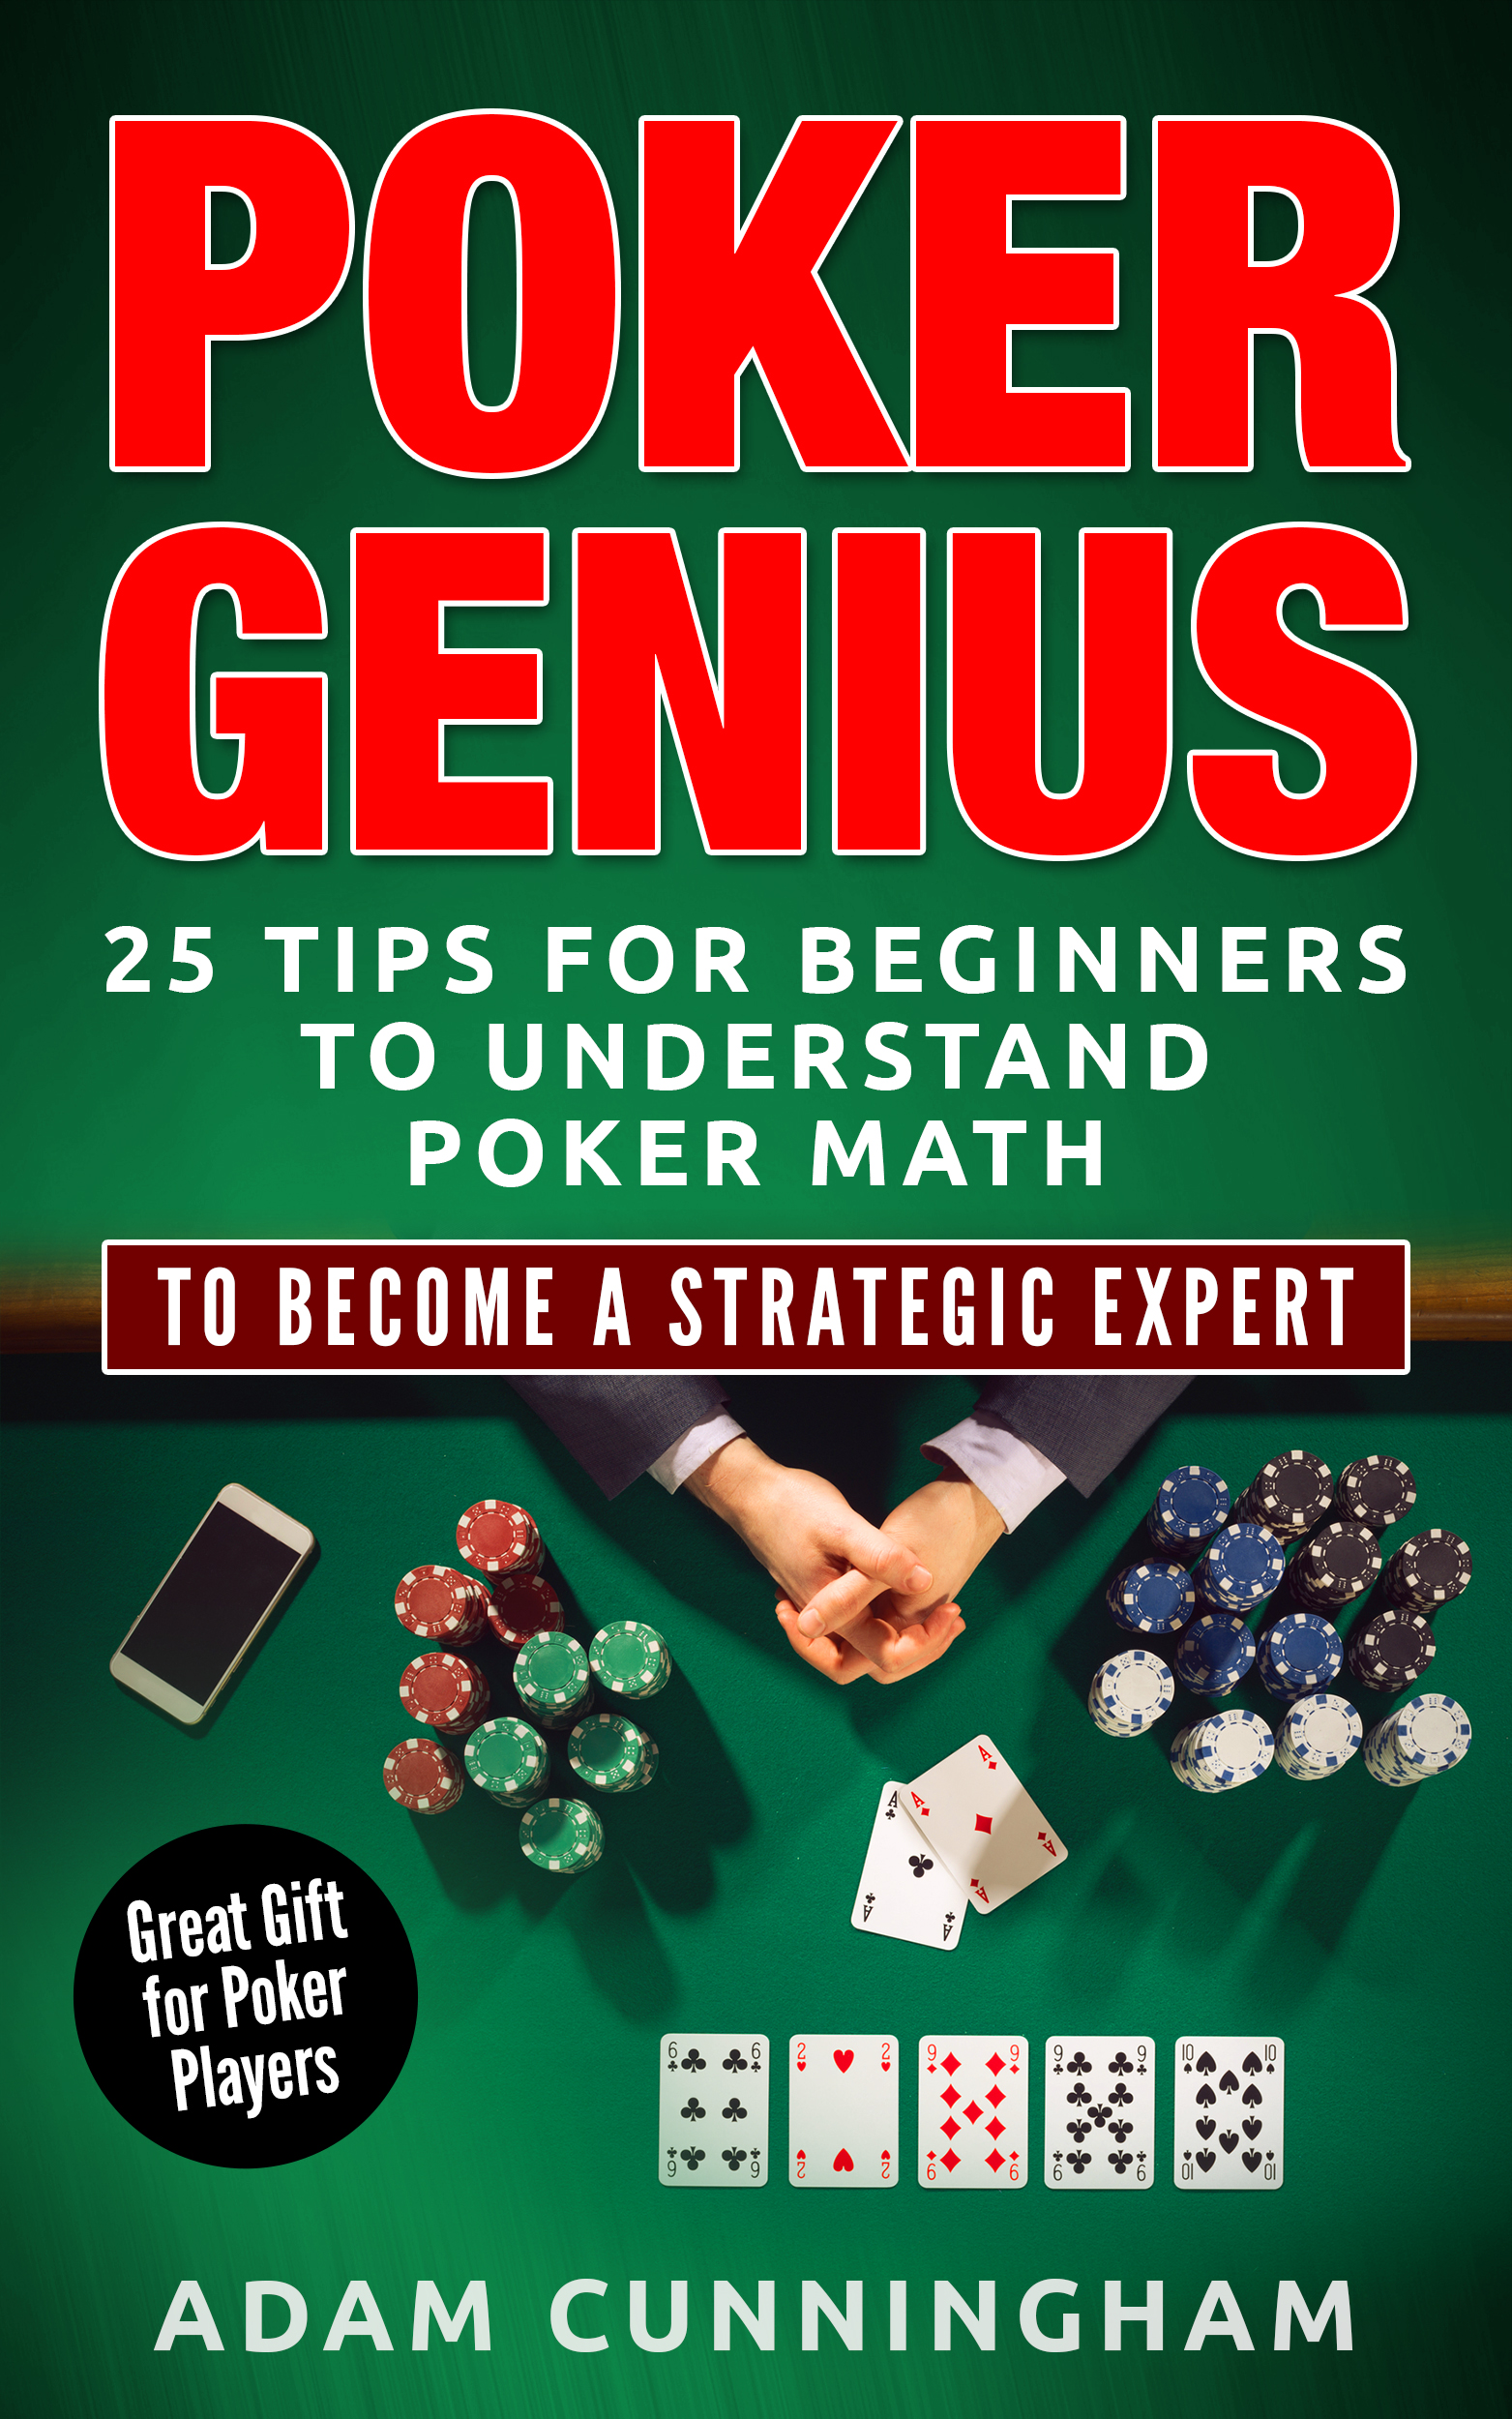 FREE: Poker Genius: 25 Tips For Beginners For Understanding Poker Math To Become A Strategic Expert by Adam Cunningham